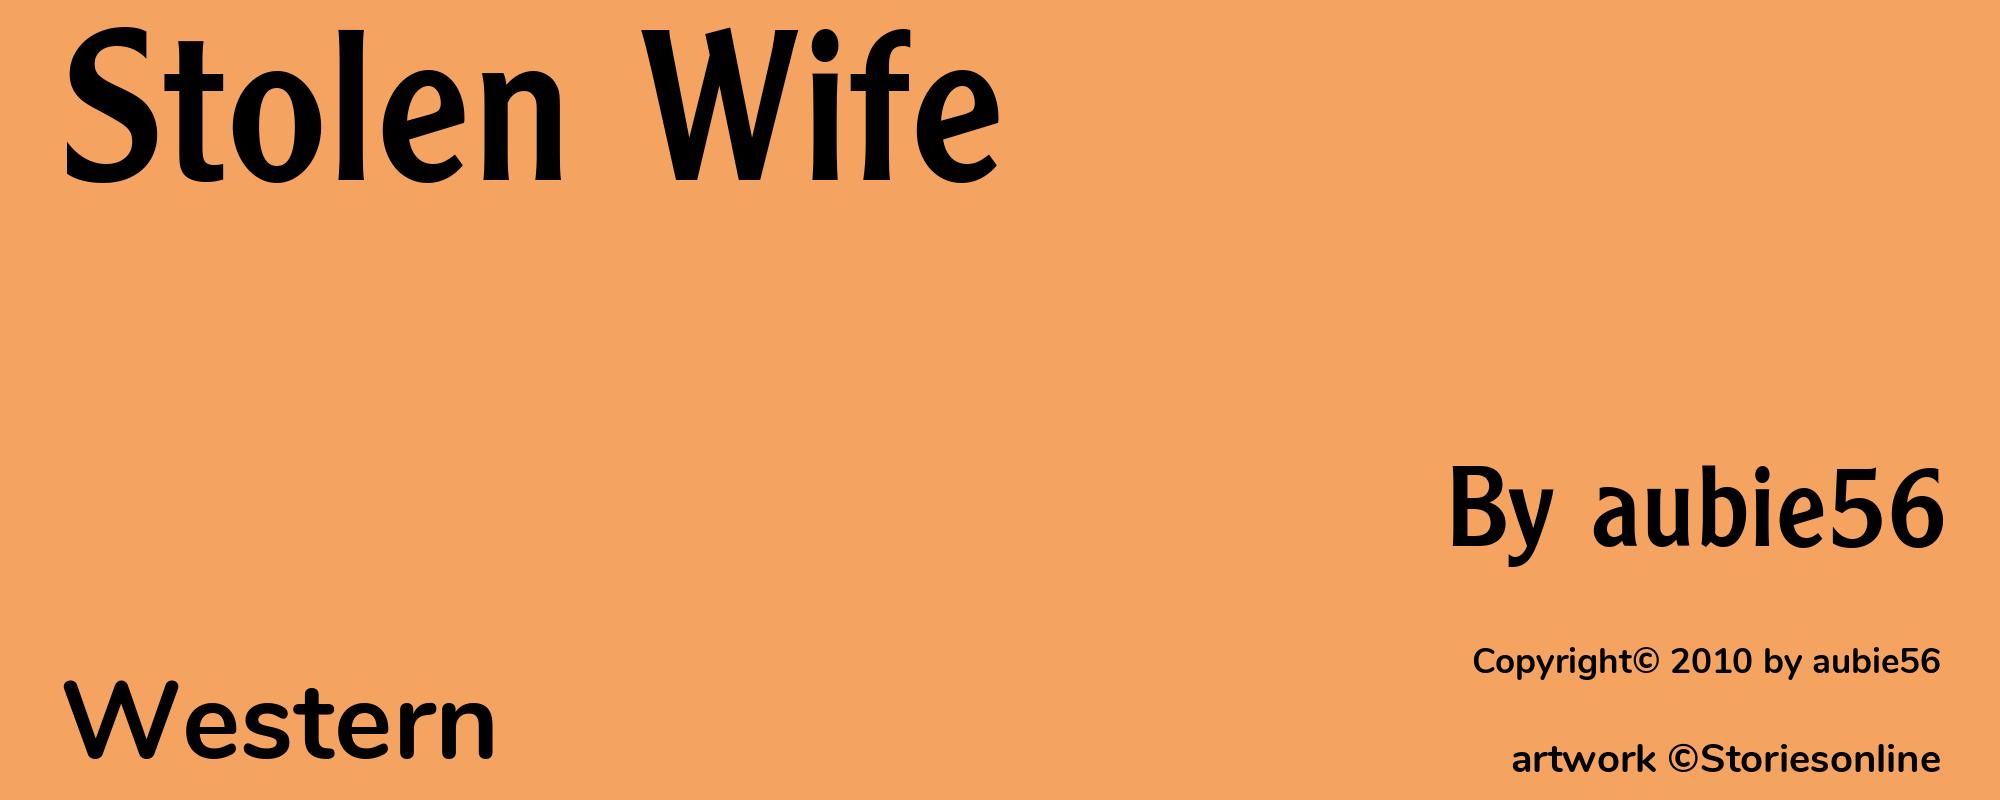 Stolen Wife - Cover